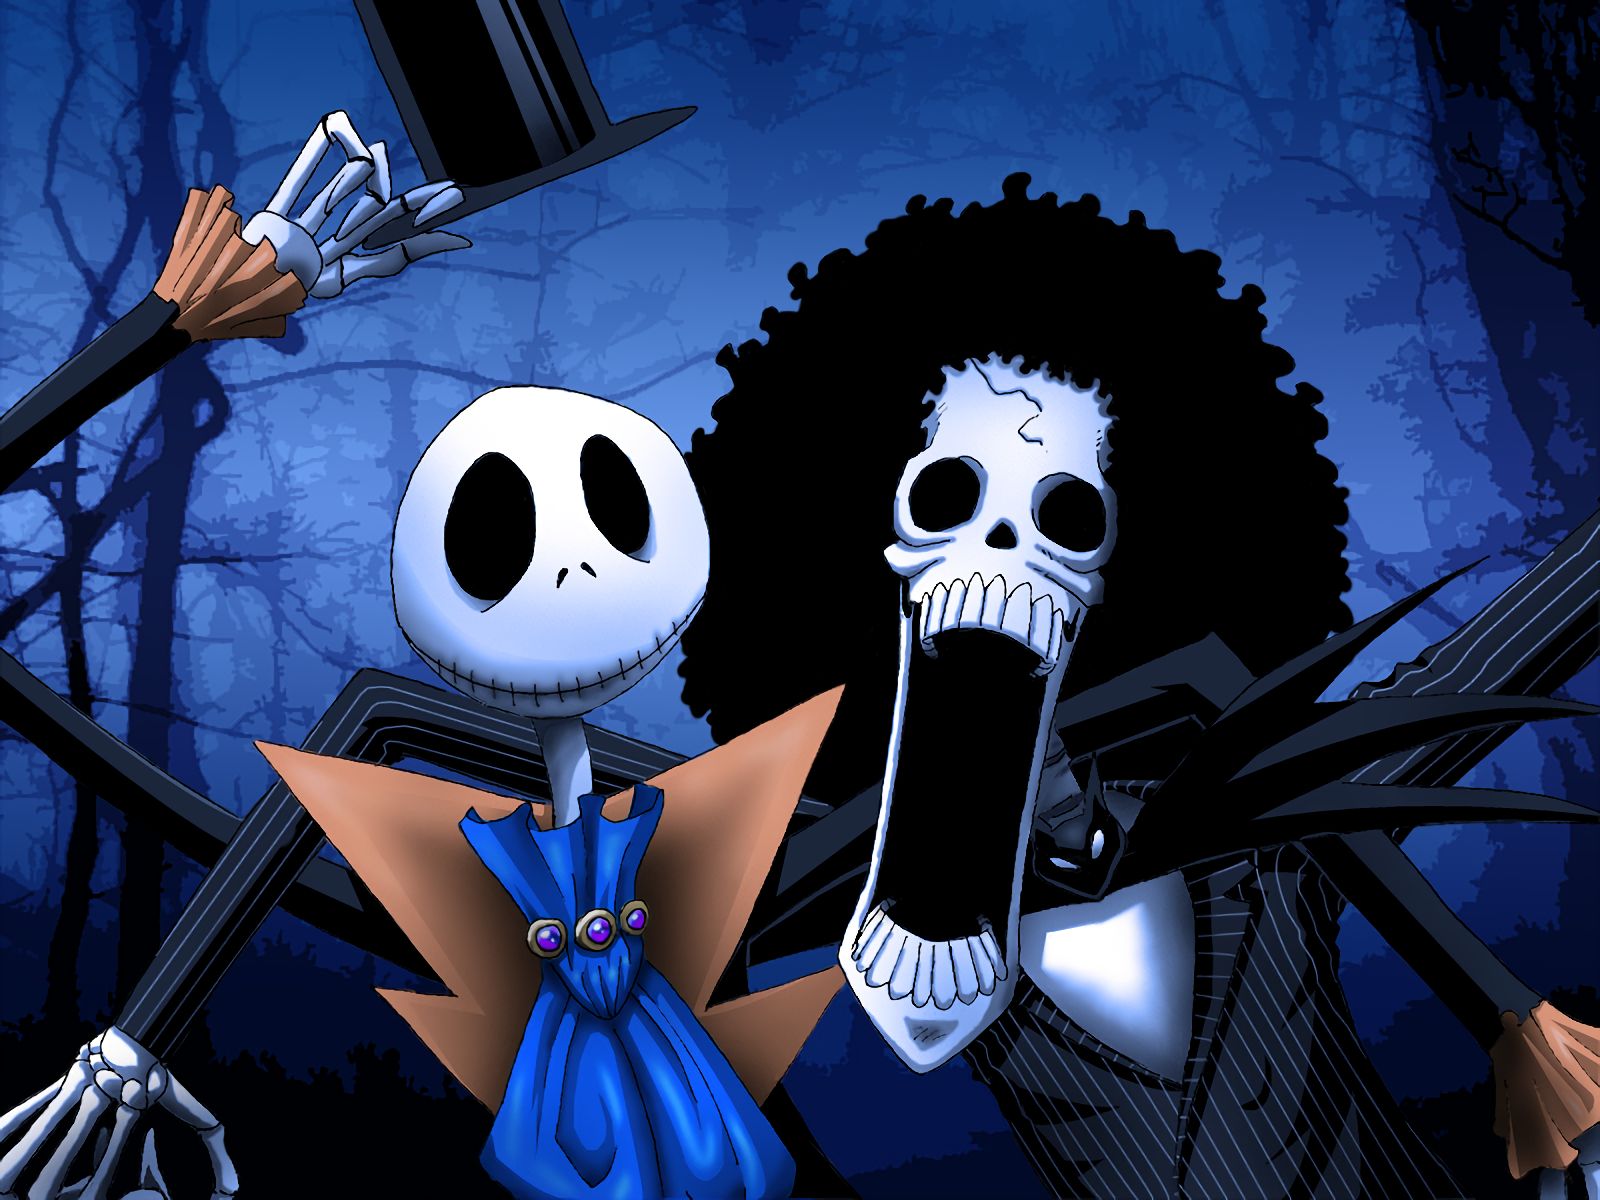 New Lock Screen Wallpapers one piece, crossover, brook (one piece), the nightmare before christmas, anime, jack skellington